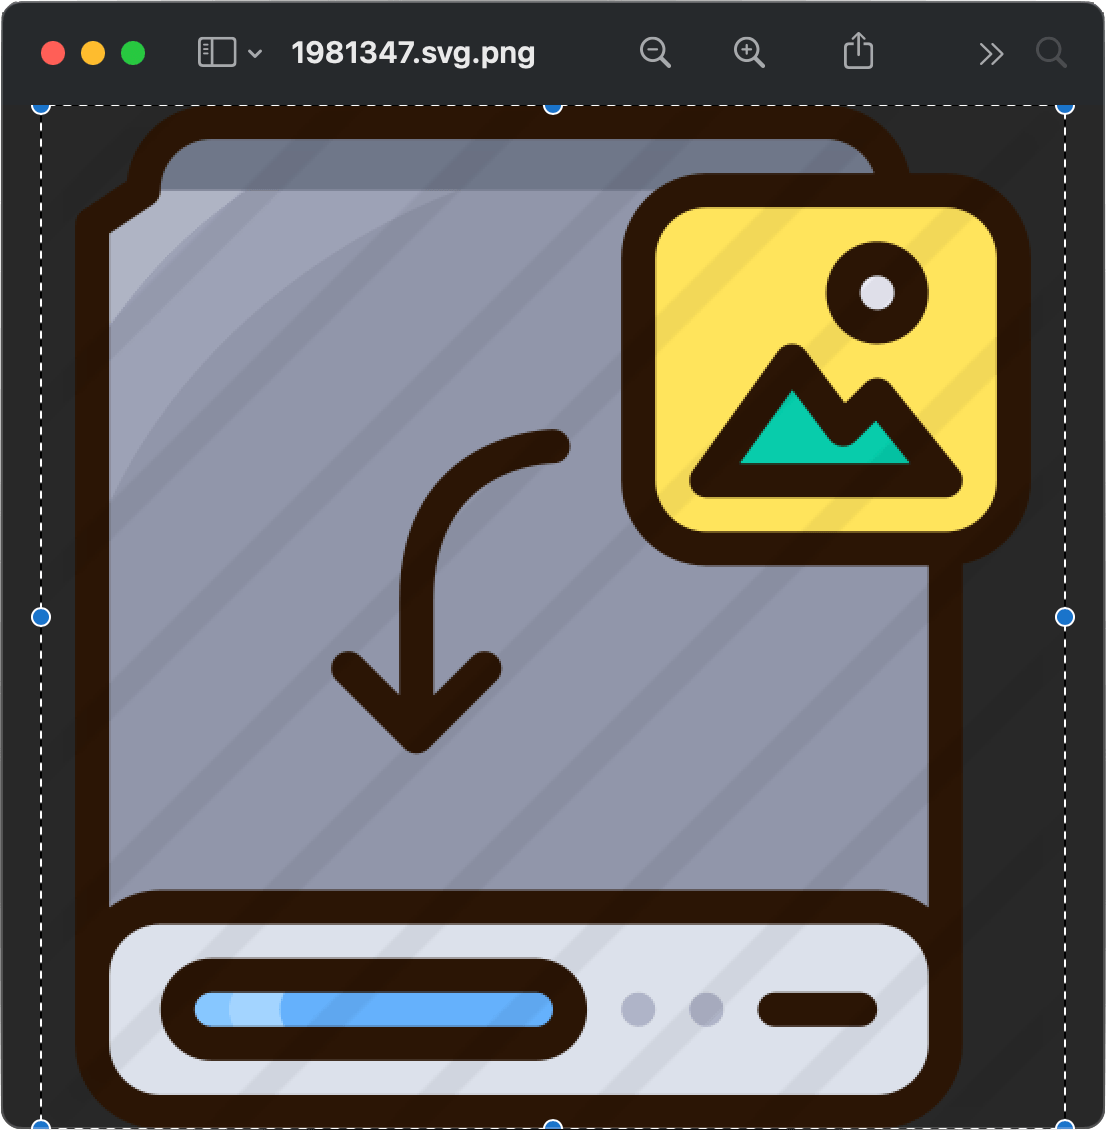 change icon for usb on mac